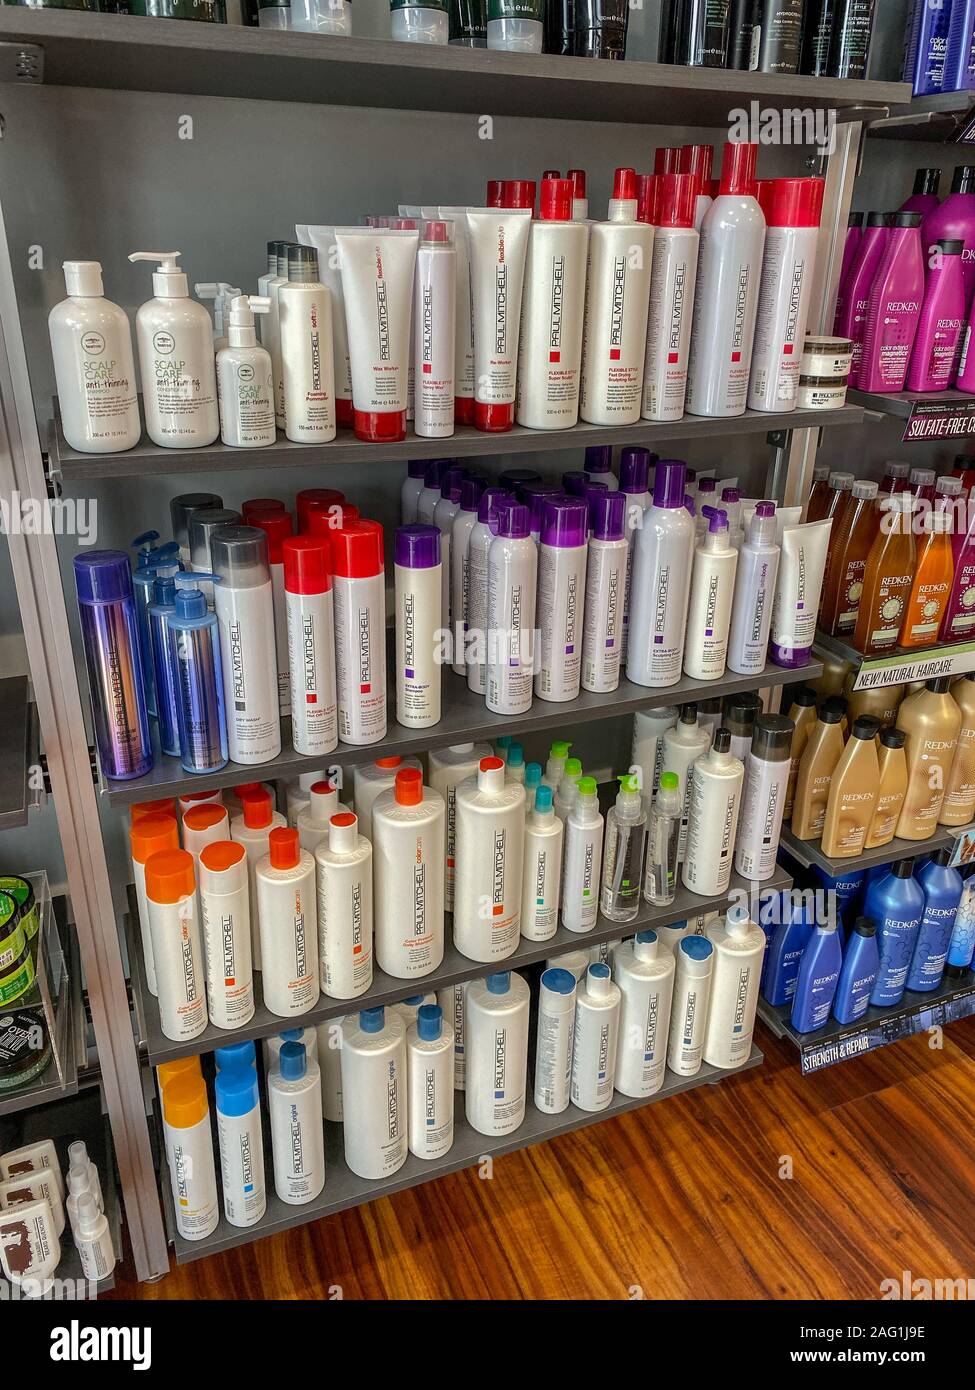 Orlando,FL/USA-12/13/19: Shelves of Paul Mitchell hair shampoo, conditioner and styling products at a Supercuts Hair Salon. Stock Photo